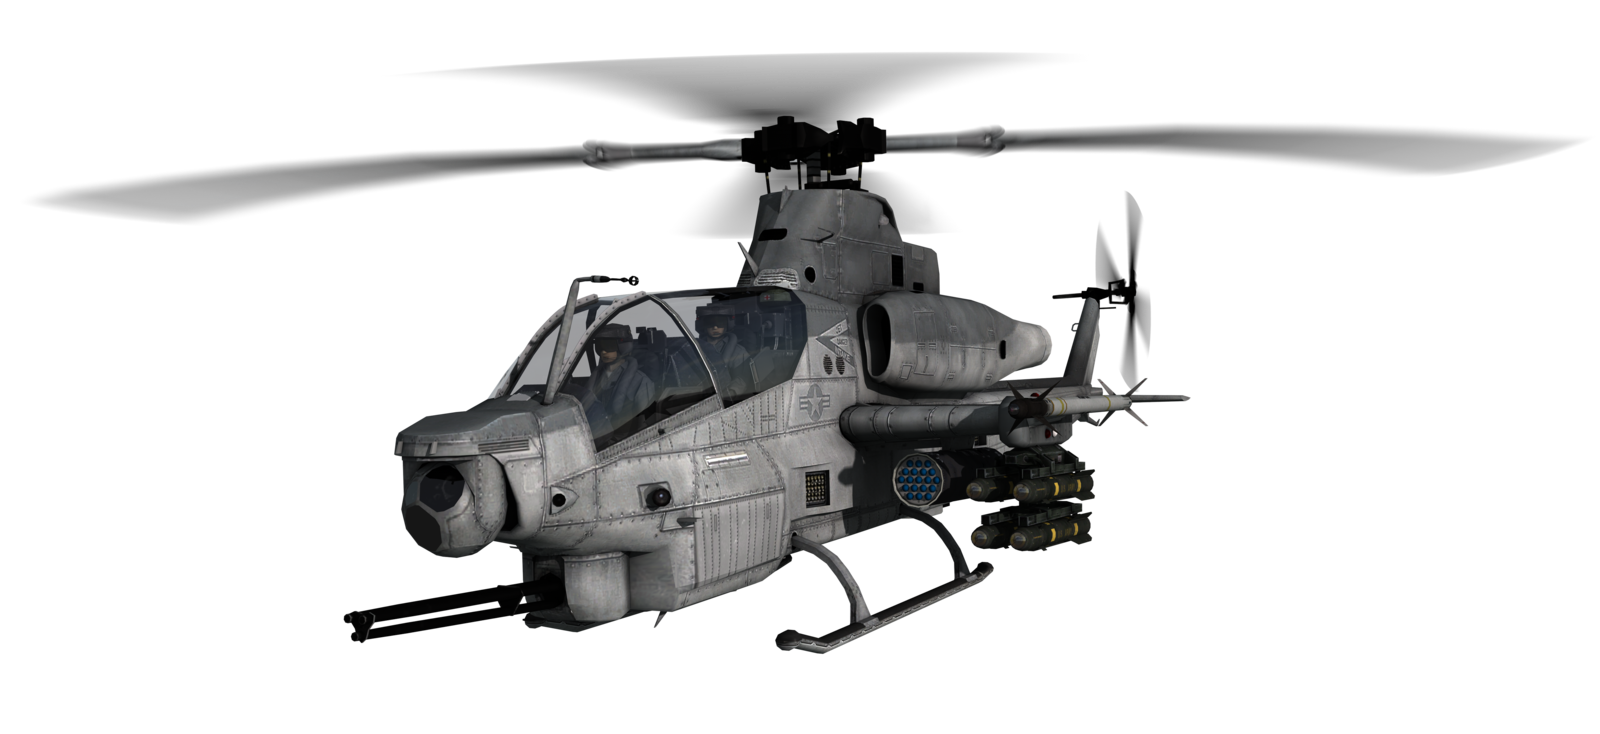 Helicopter Png Image - Helicopter, Transparent background PNG HD thumbnail